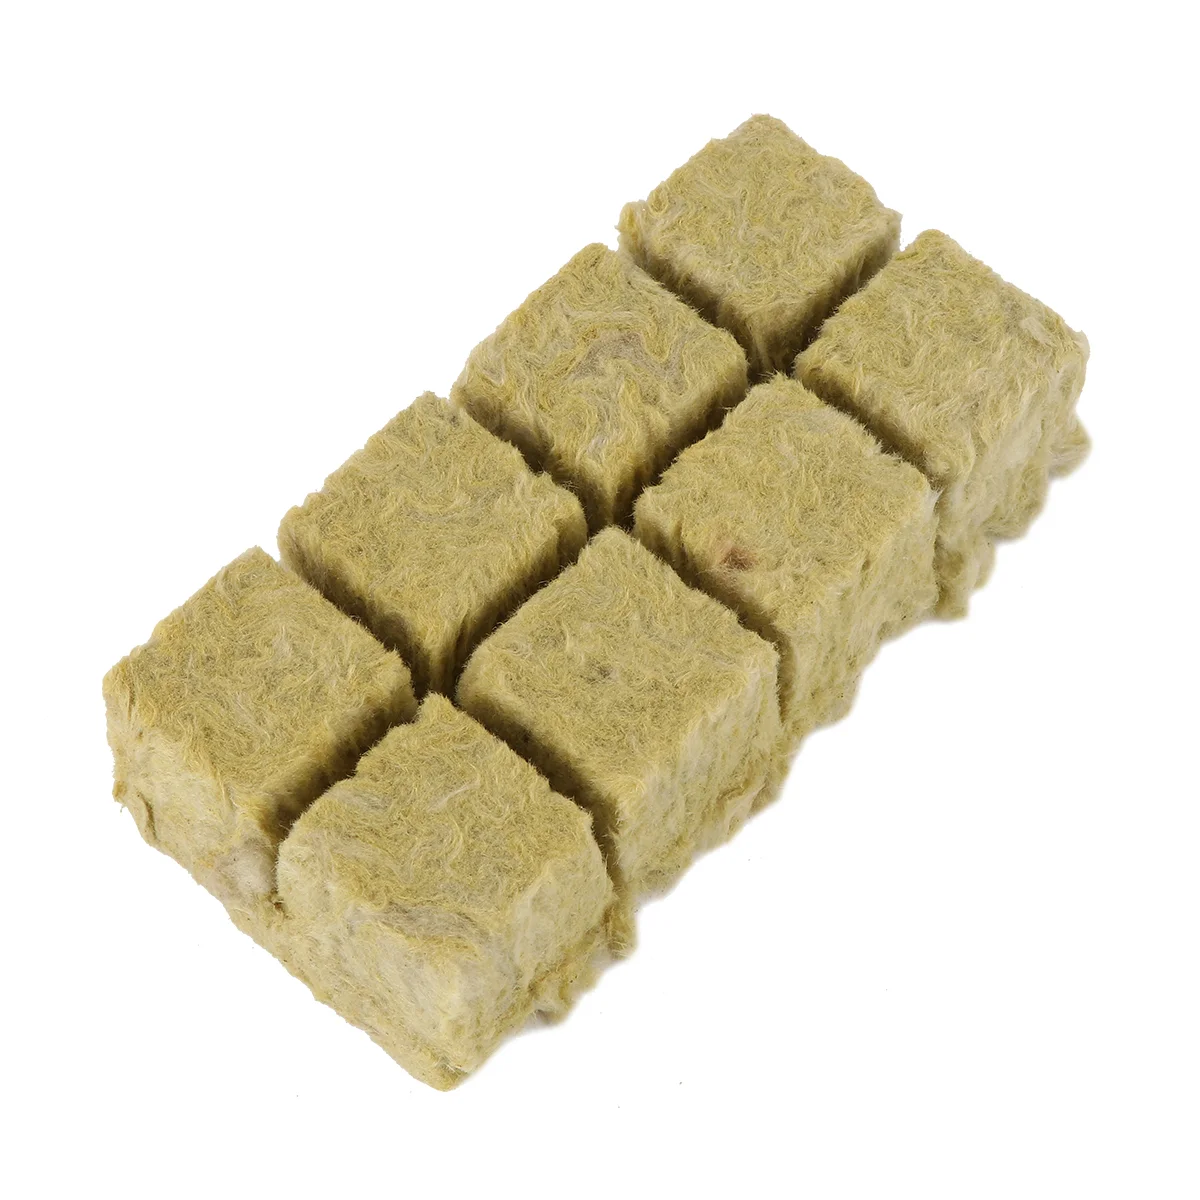 

8pcs Mineralwool Grow Cubes Starter Plugs for Growing Hydroponic Grow Media for Rooting Cuttings Clone Plants Germination Start